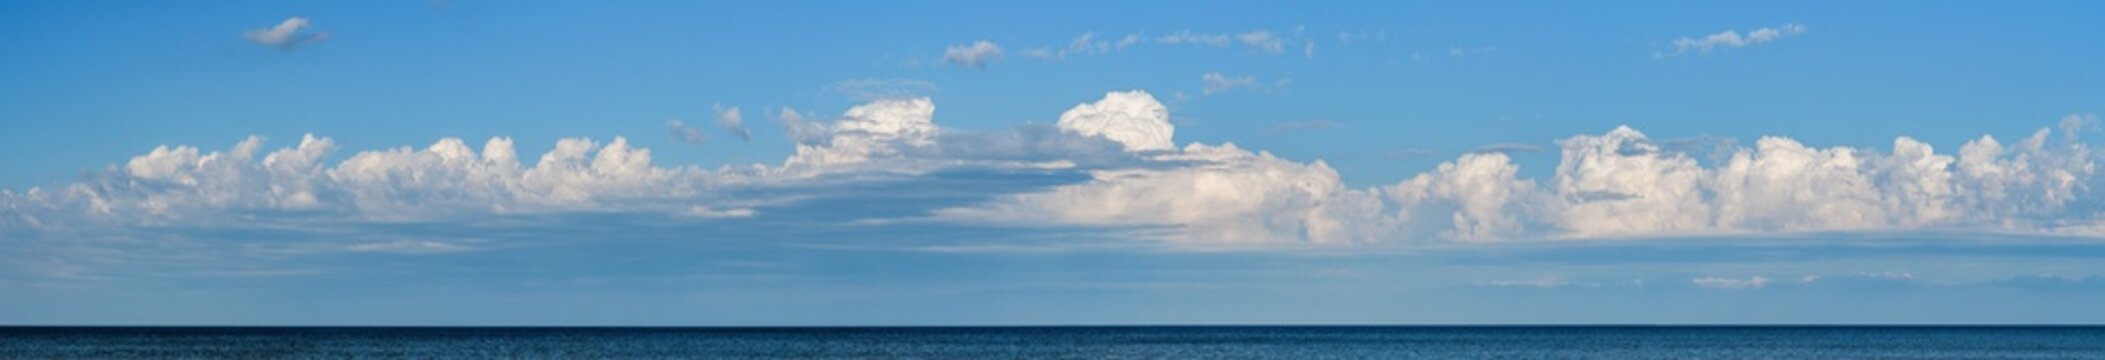 Panorama of sky with clouds over the sea horizon, nature background. Wide horizontal marine landscape with a beautiful sky for your weather banner or billboard.